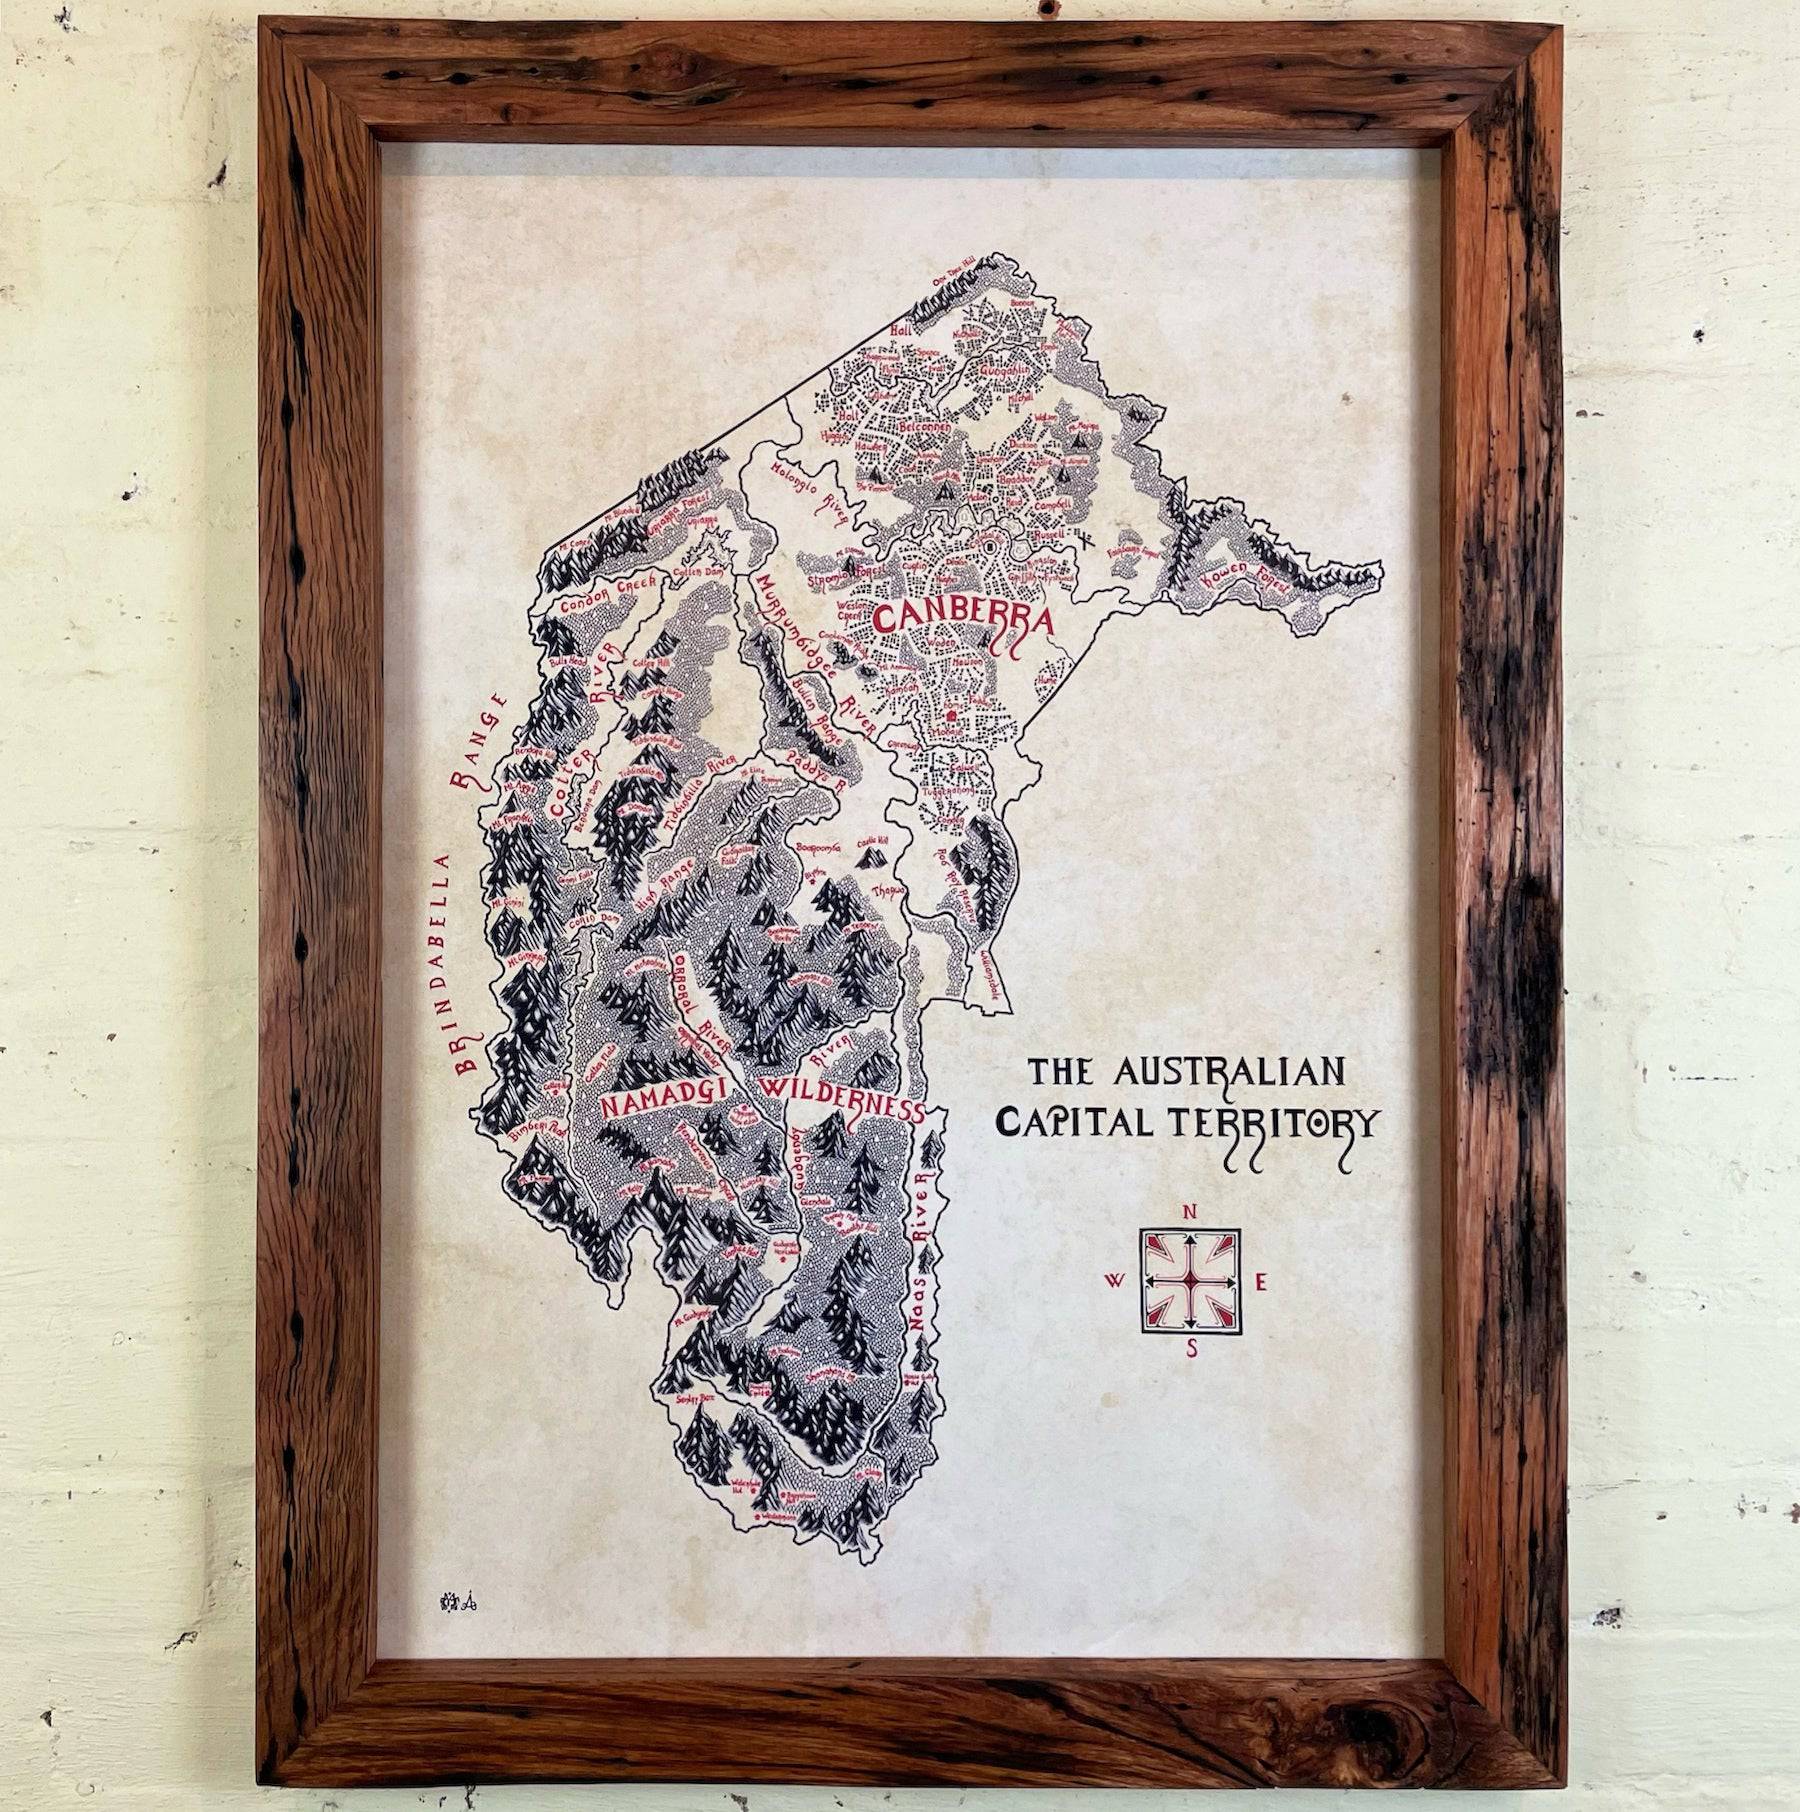 CHUNKY OILED AUSTRALIAN MADE PICTURE FRAME AROUND A CANBERRA WILDWOOD MAP